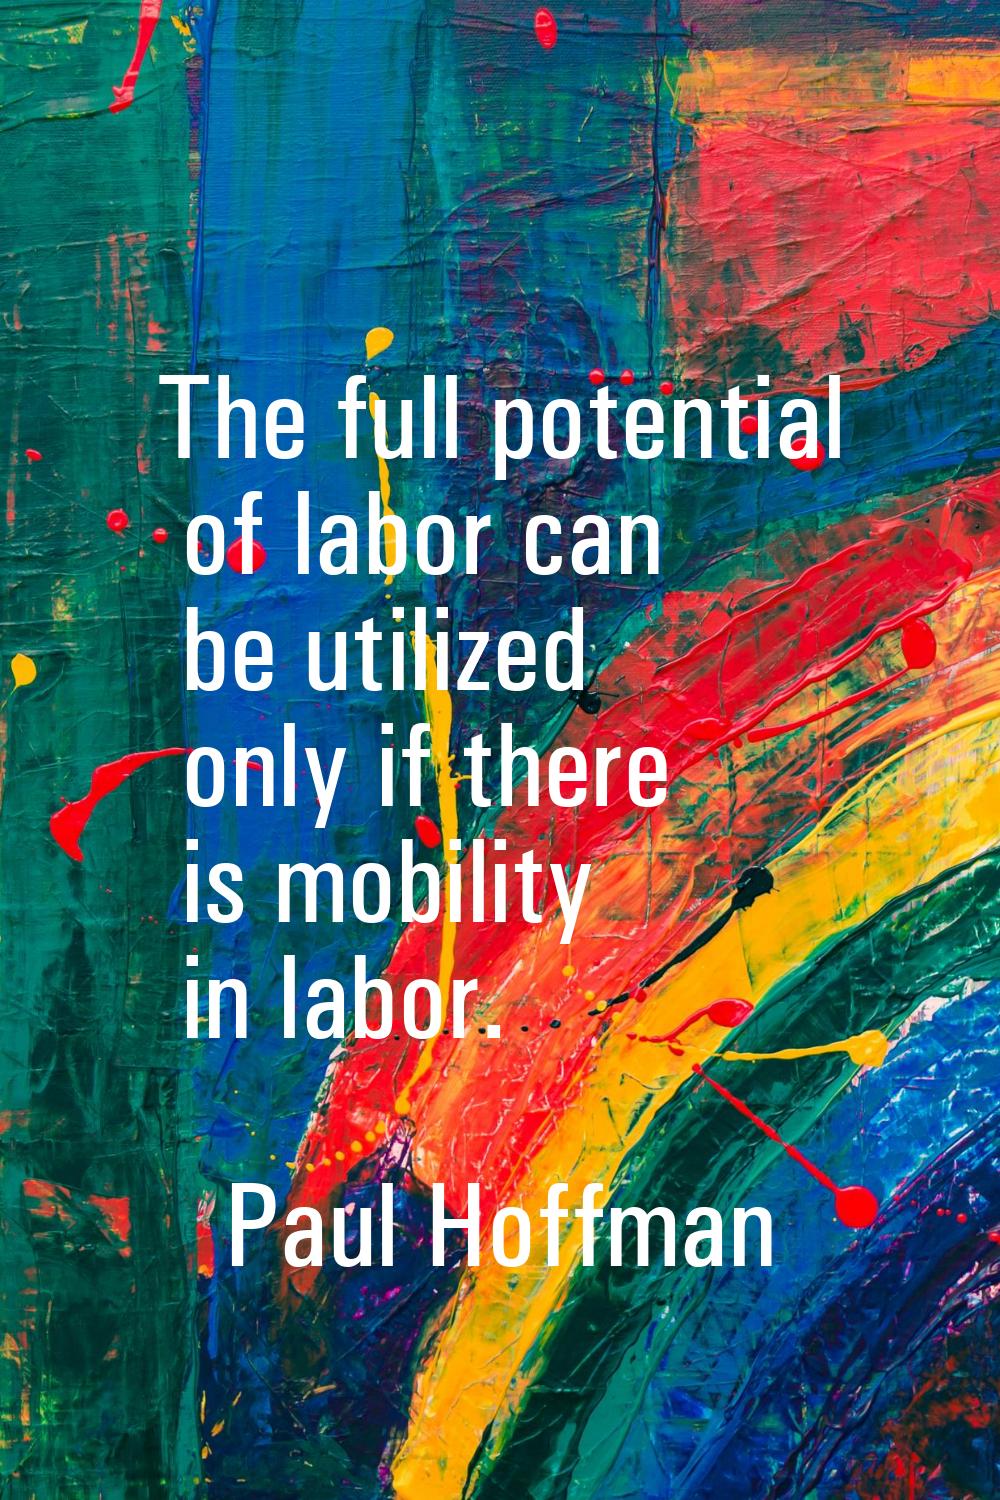 The full potential of labor can be utilized only if there is mobility in labor.